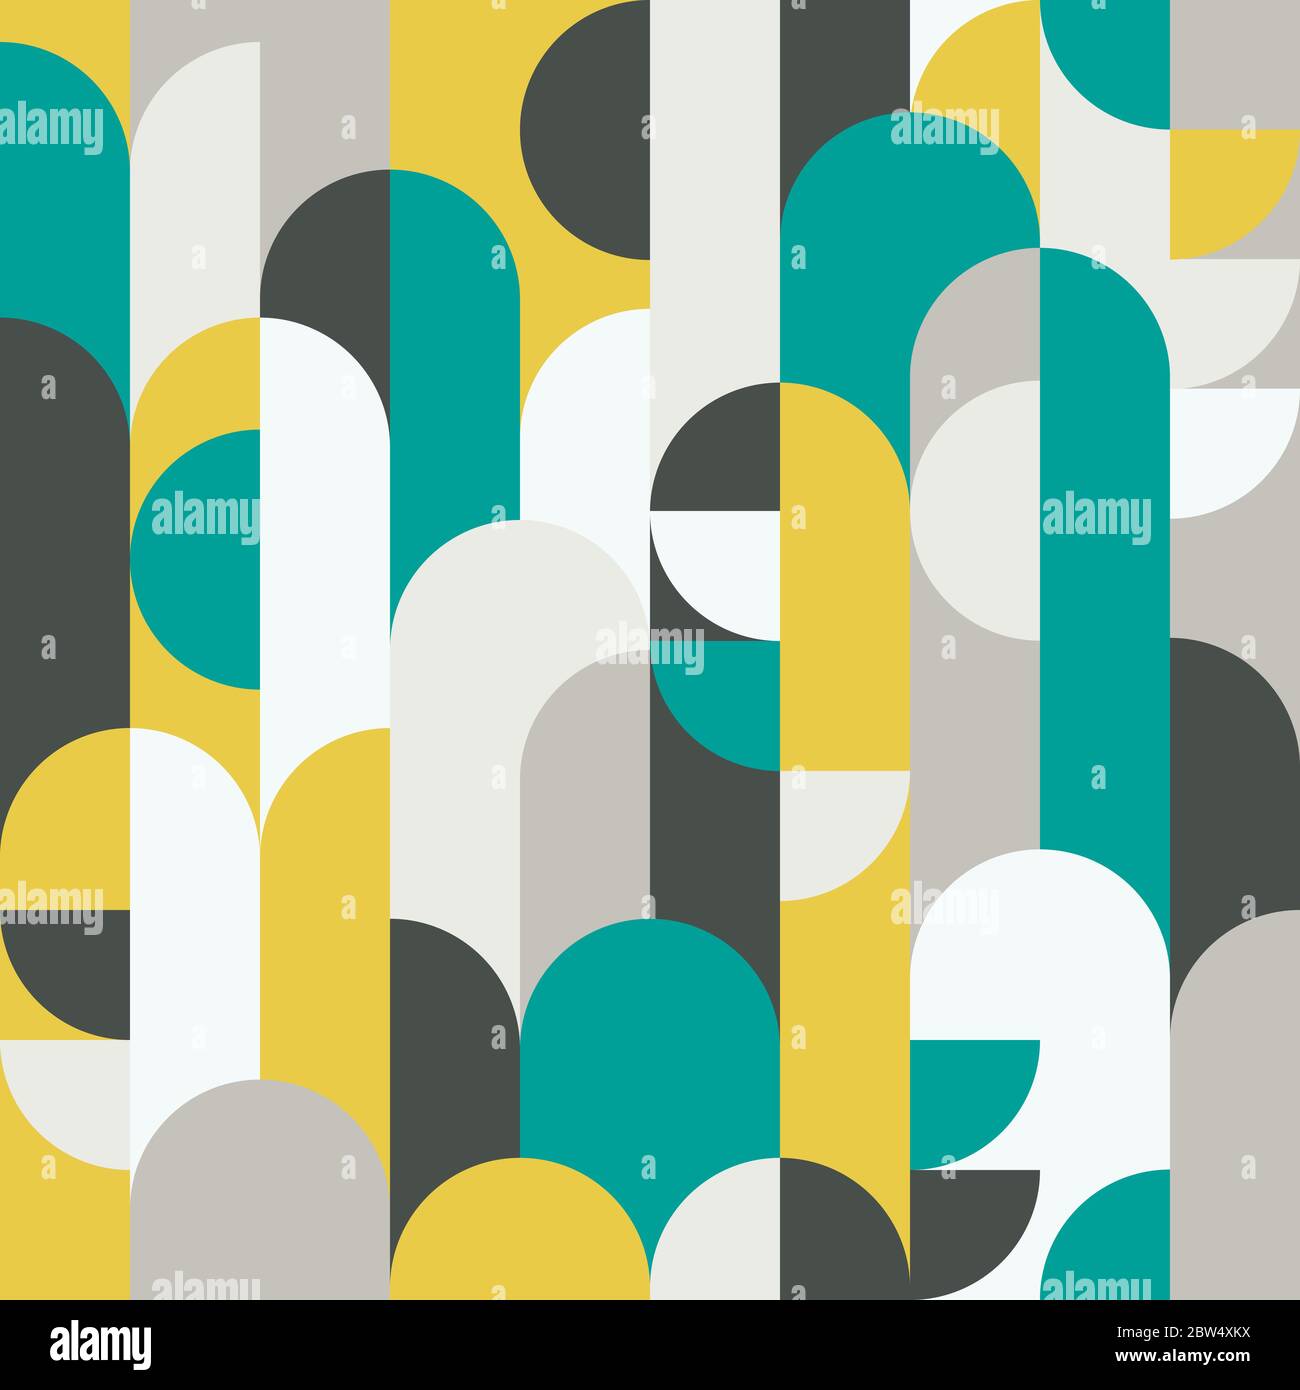 Abstract retro style seamless vector pattern with geometric shapes colored in yellow, green and grey. Modern geometrical pattern for textiles, fashion Stock Vector